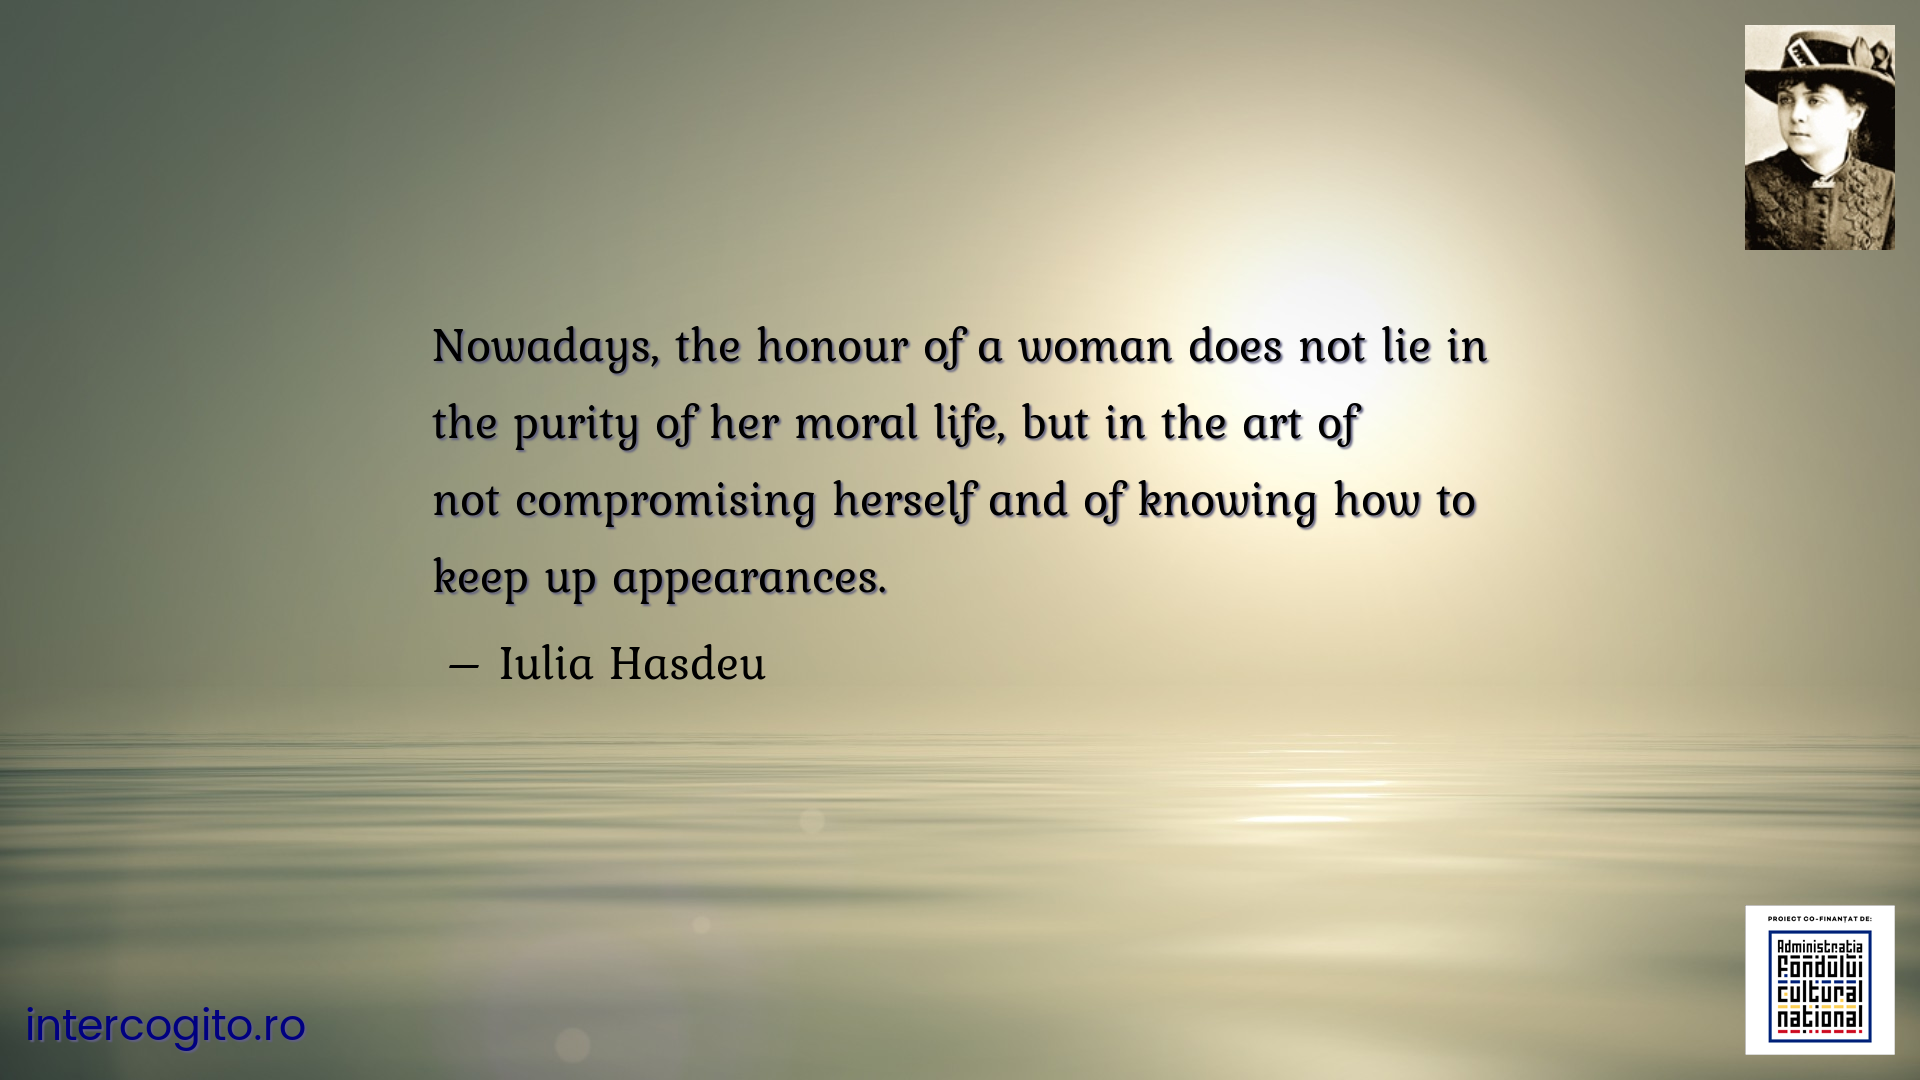 Nowadays, the honour of a woman does not lie in the purity of her moral life, but in the art of not compromising herself and of knowing how to keep up appearances.